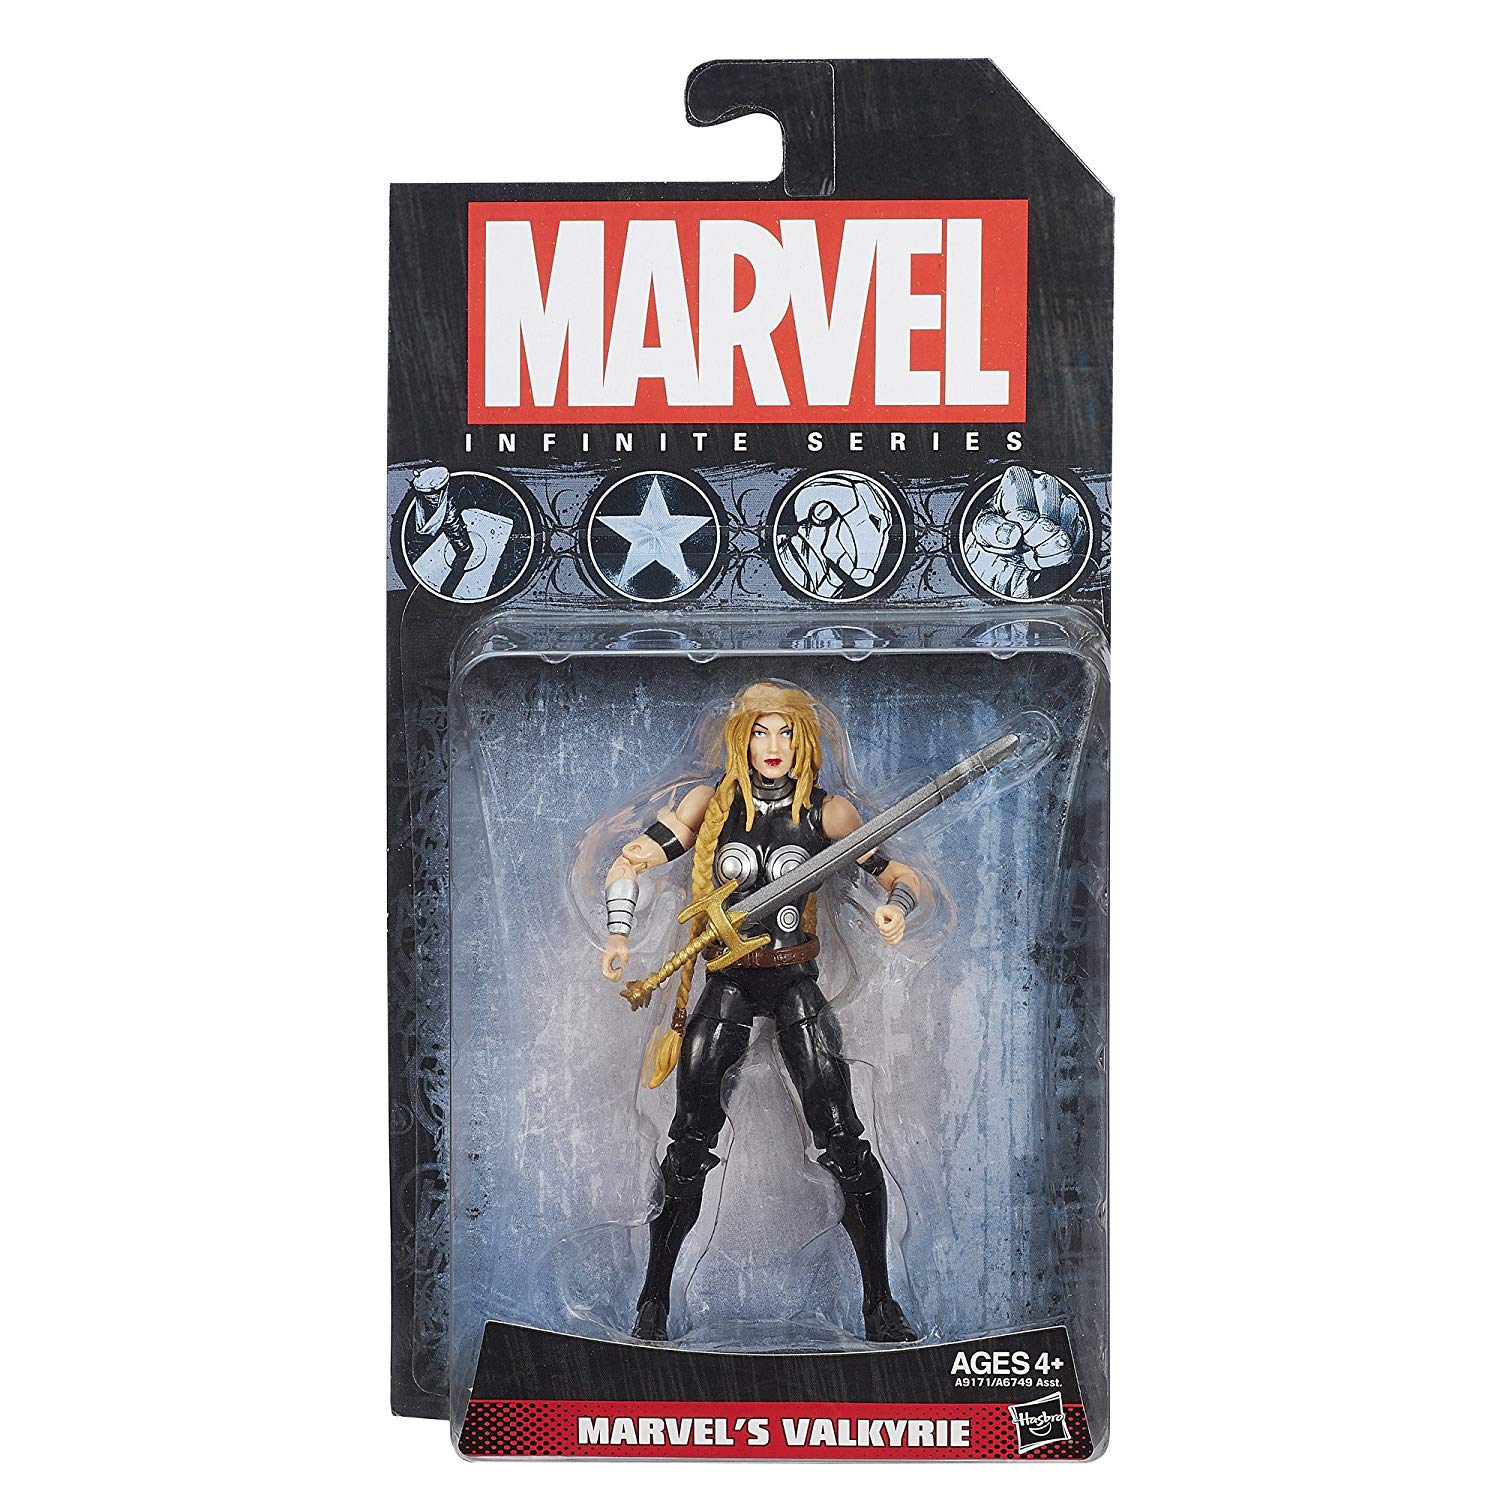 Marvel Infinite Series Valkyrie 3.75 inch Action Figure 1